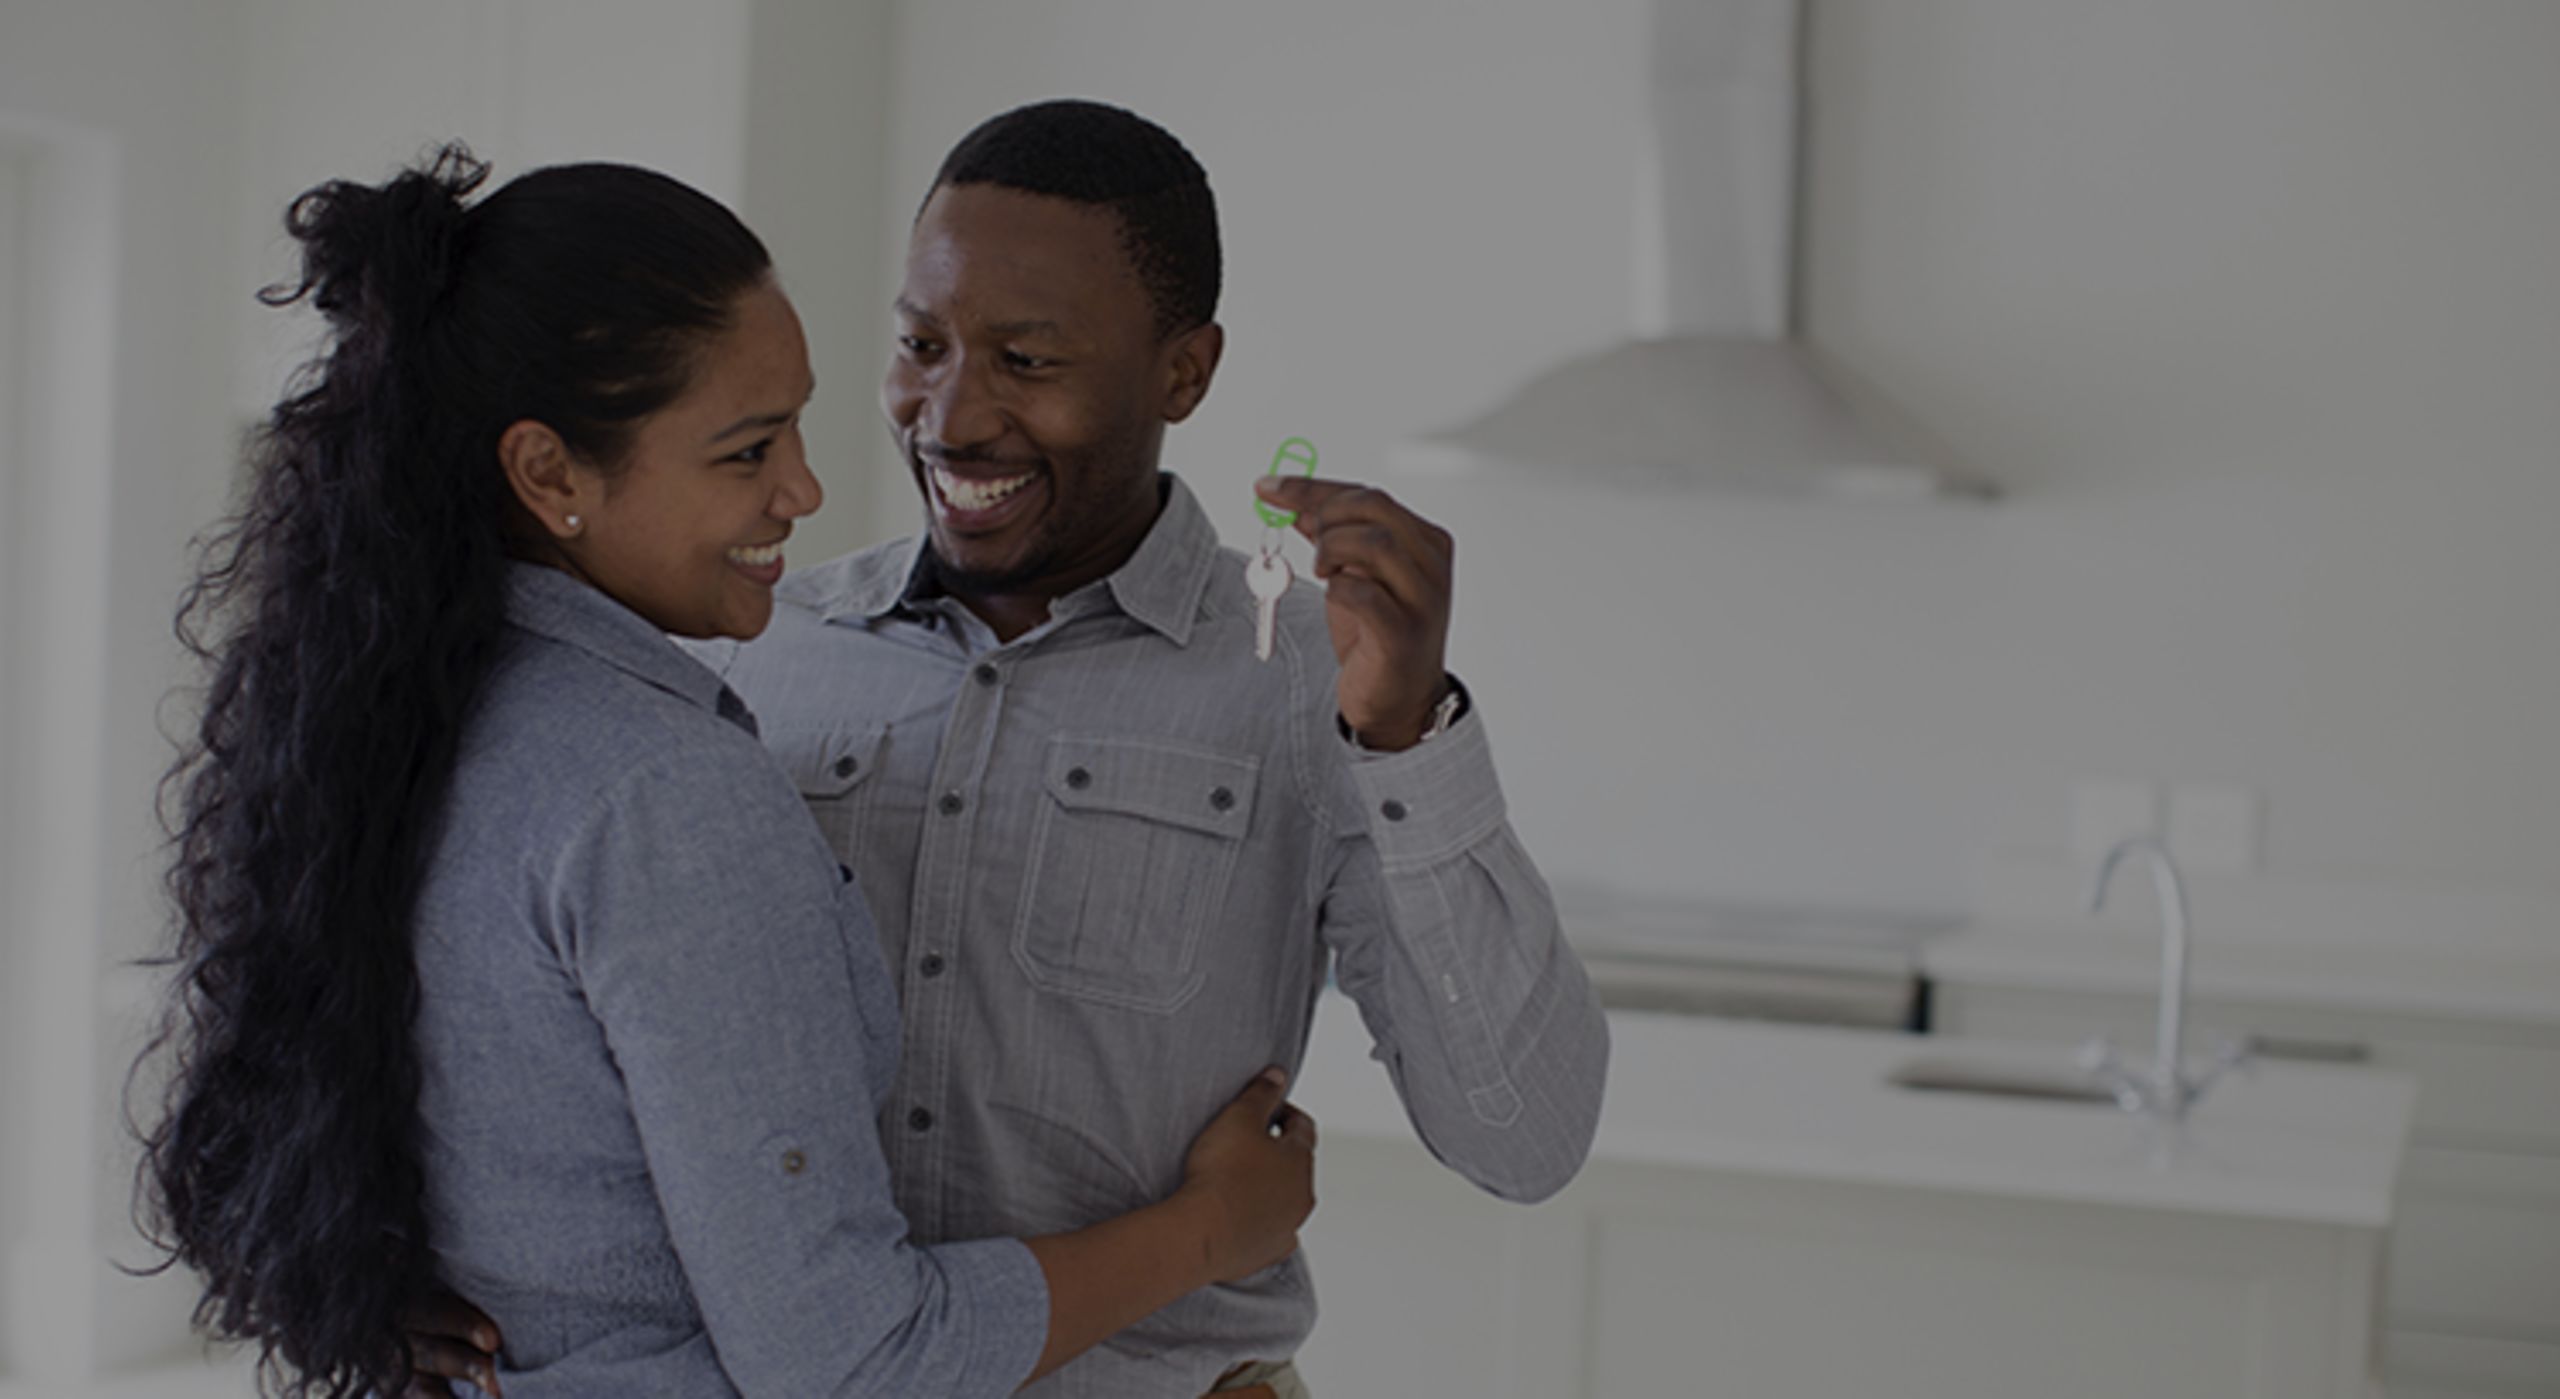 Planning on Buying a Home? Be Sure You Know Your Options.